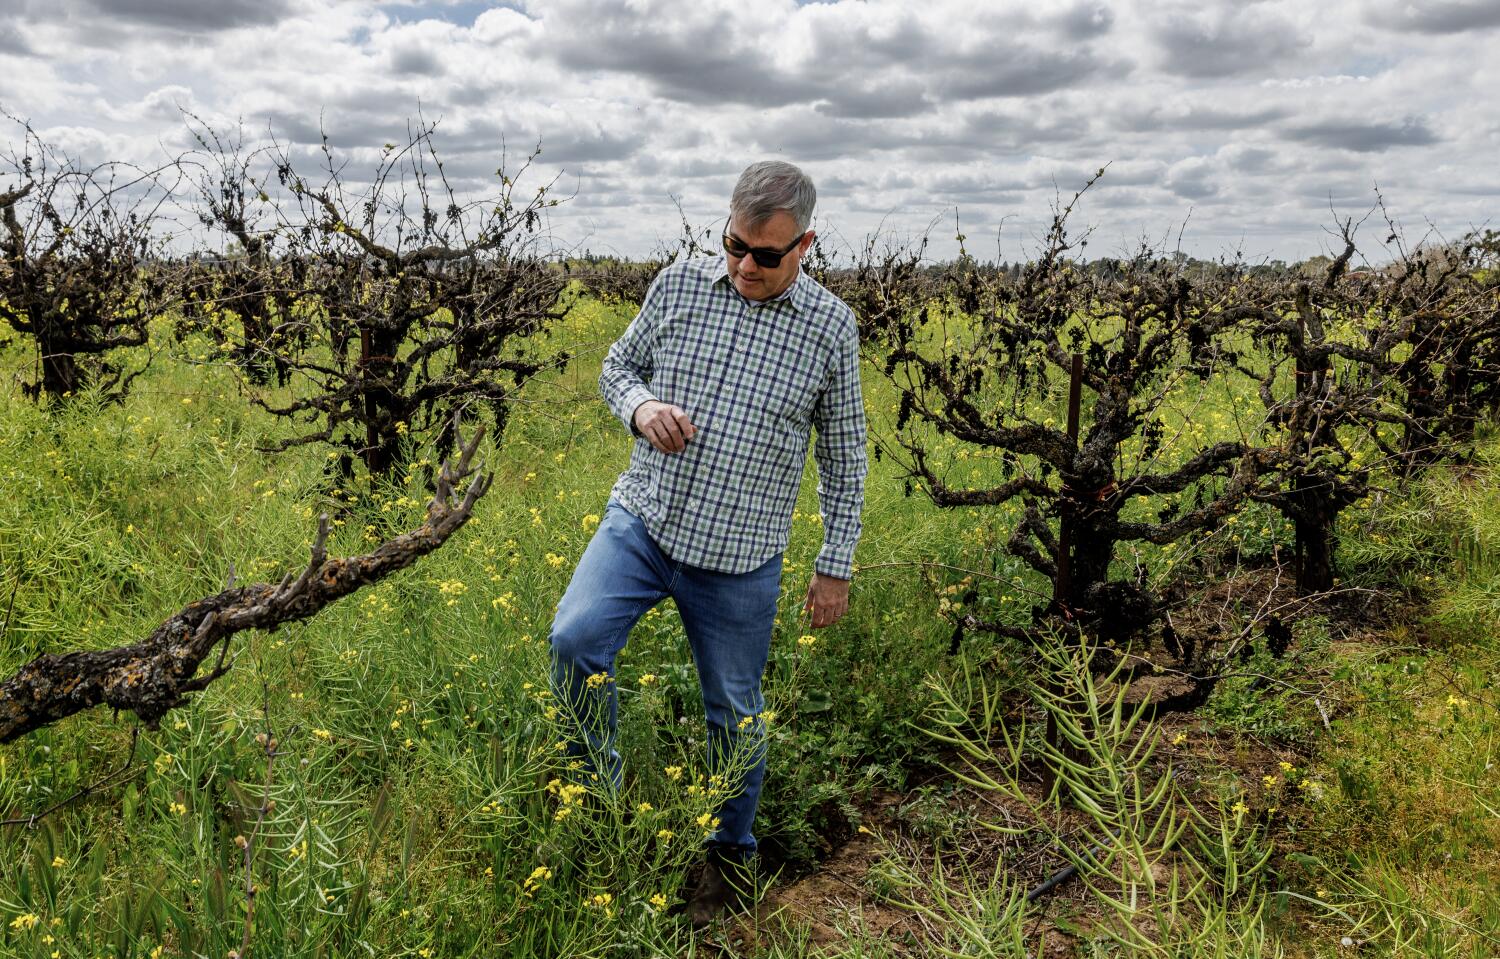 Global wine glut compounds headaches for struggling California vineyards